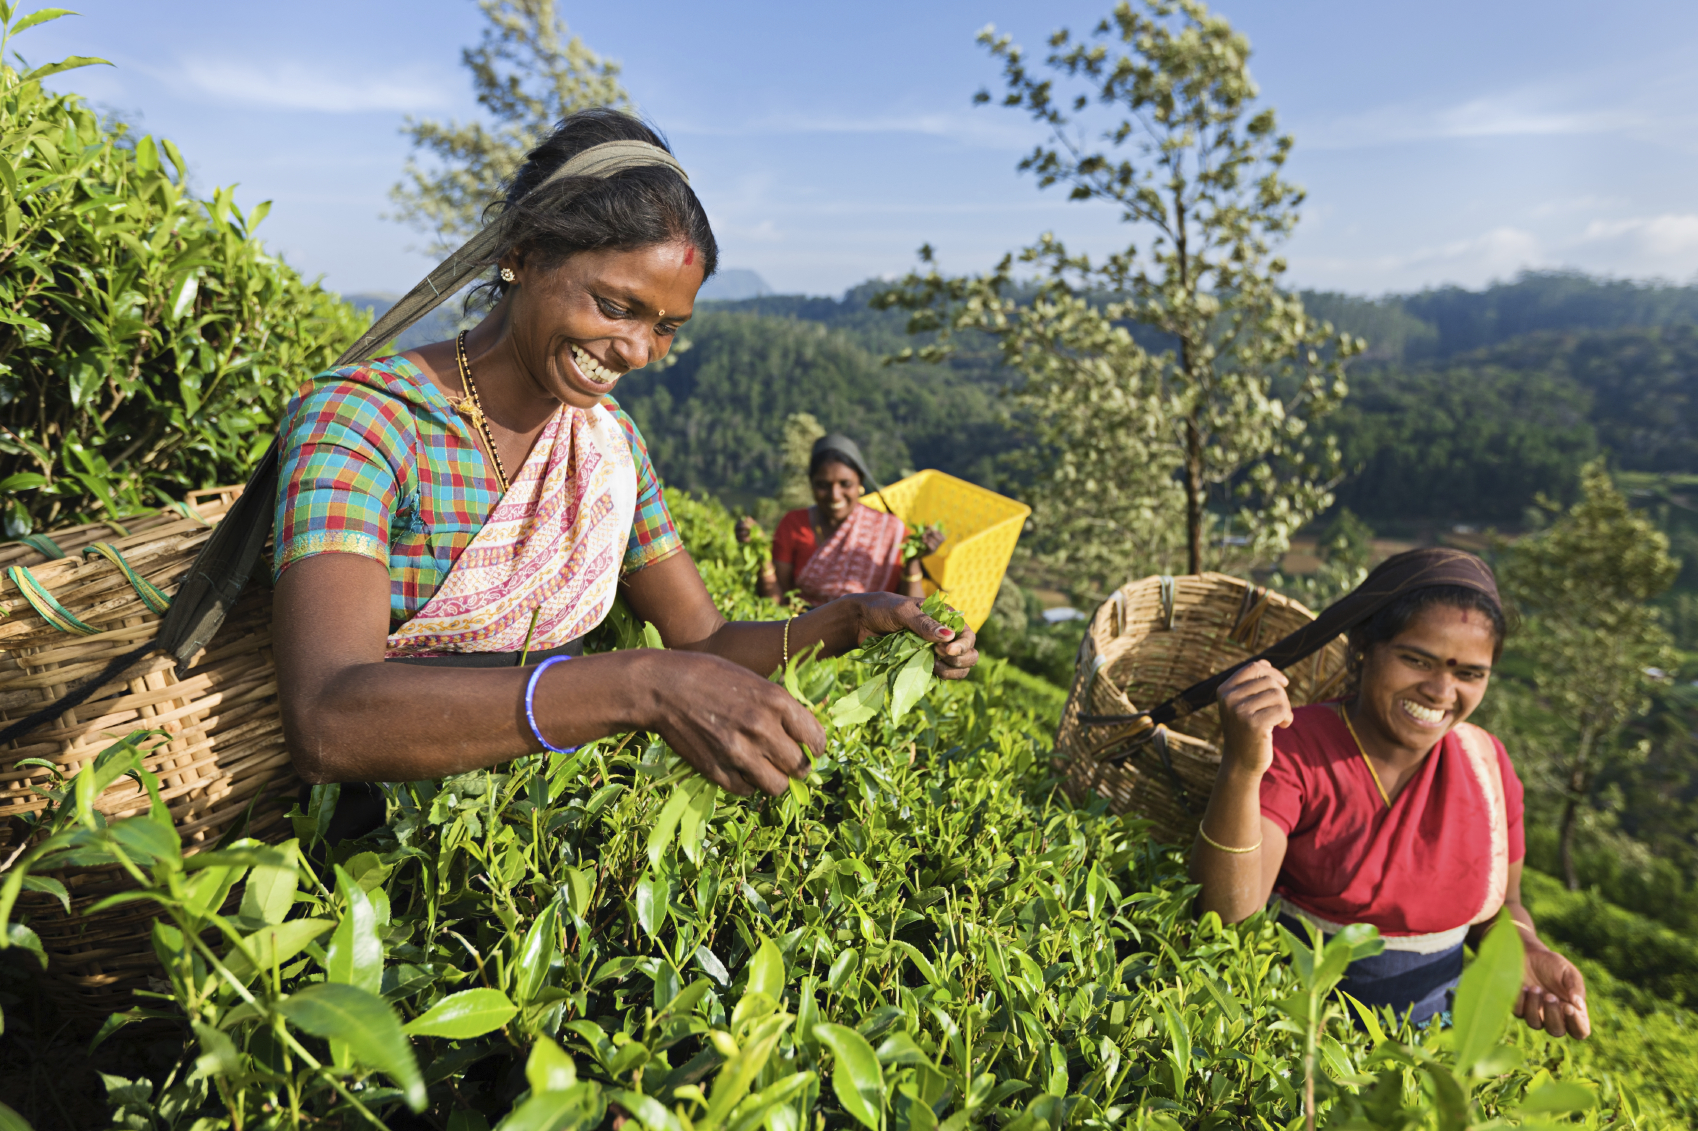 Tamil pickers collecting tea leaves on plantation